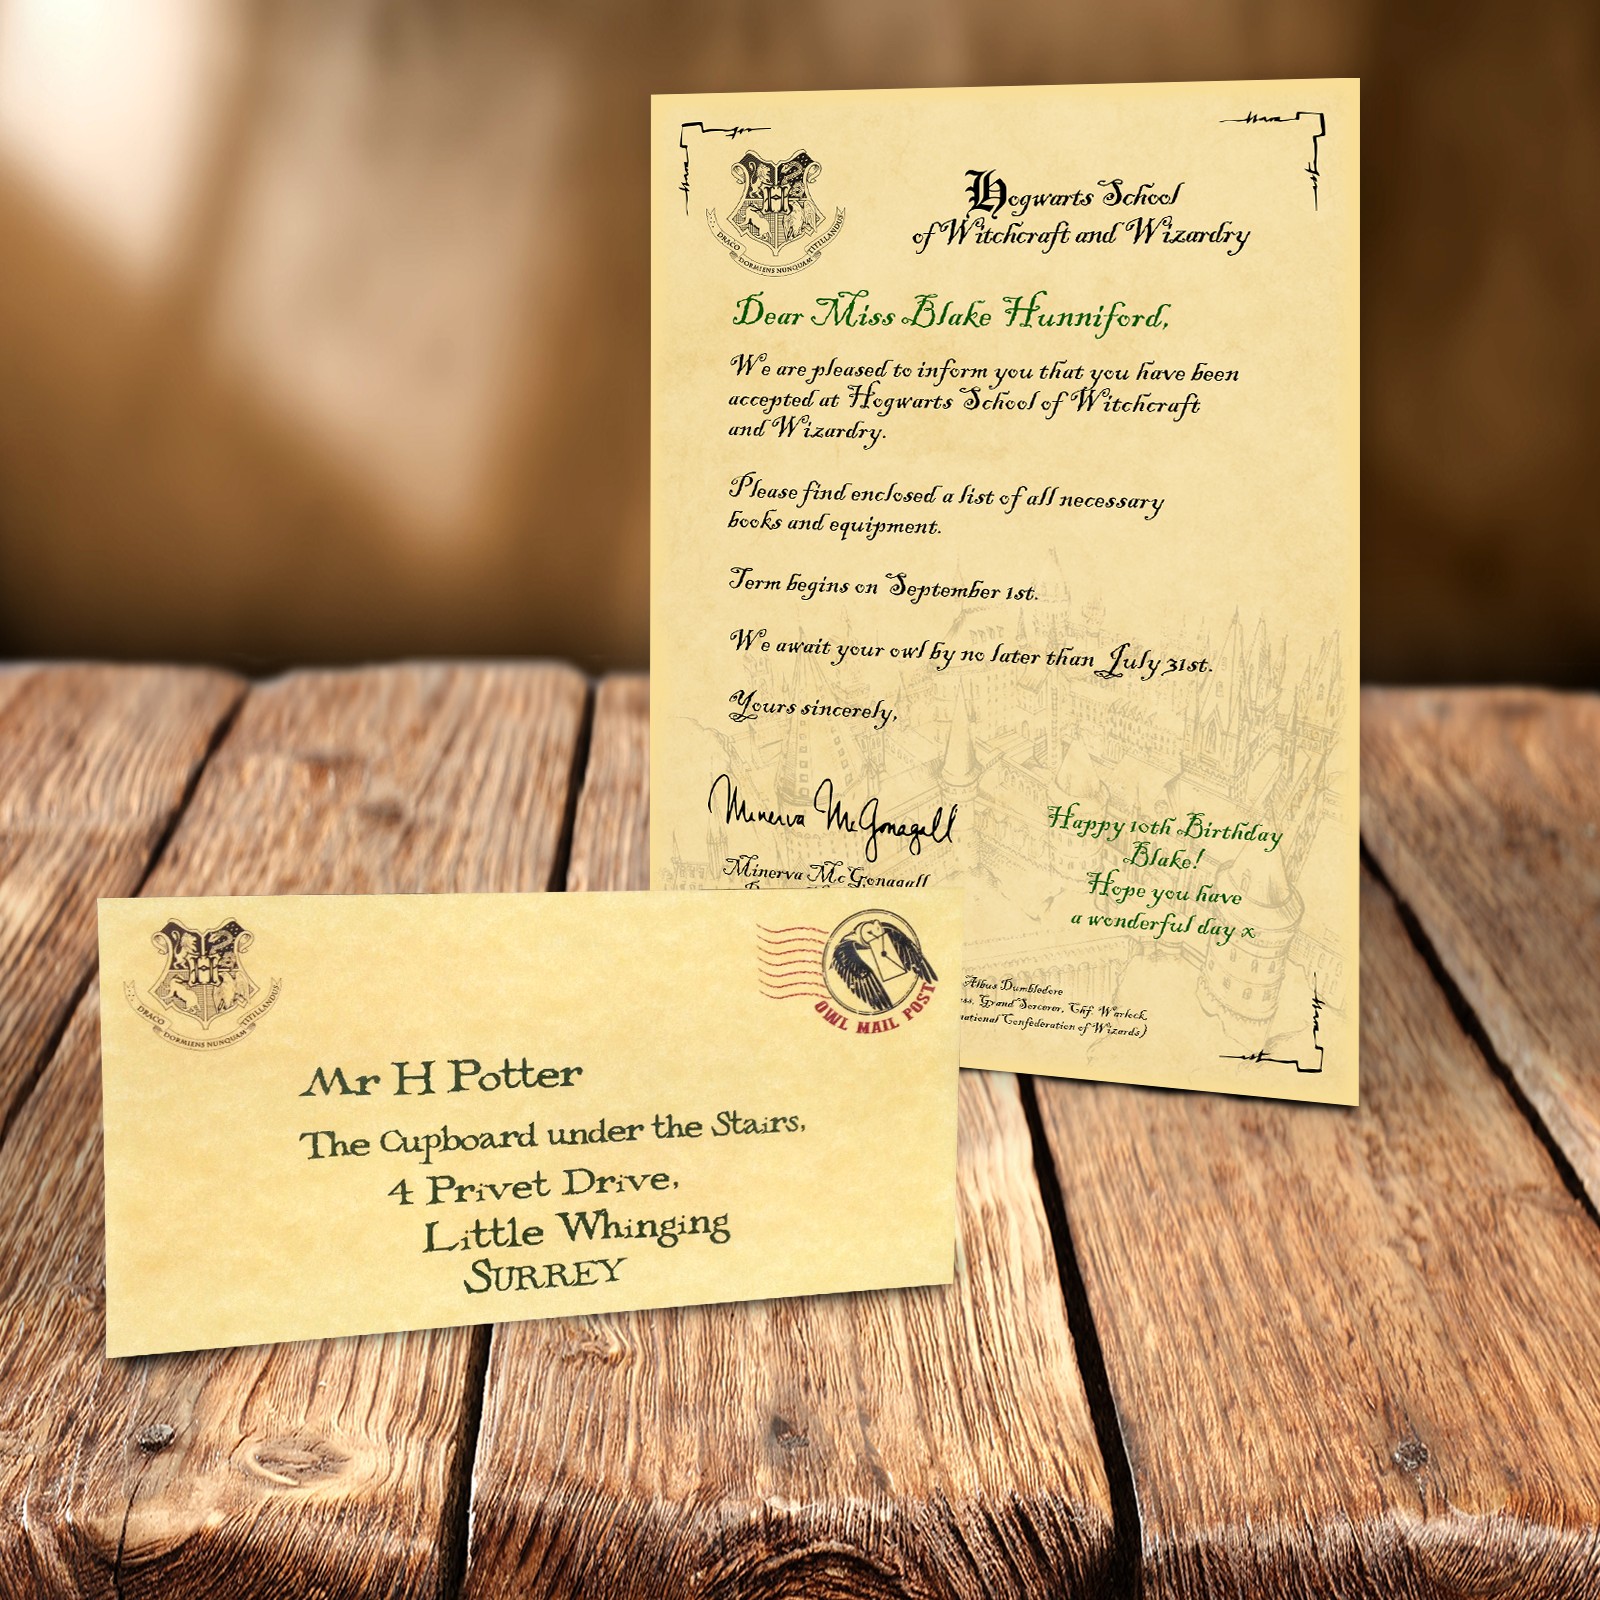 Hogwarts Letter Personalised Harry Potter Gift Express Ticket EBay Make Your Own